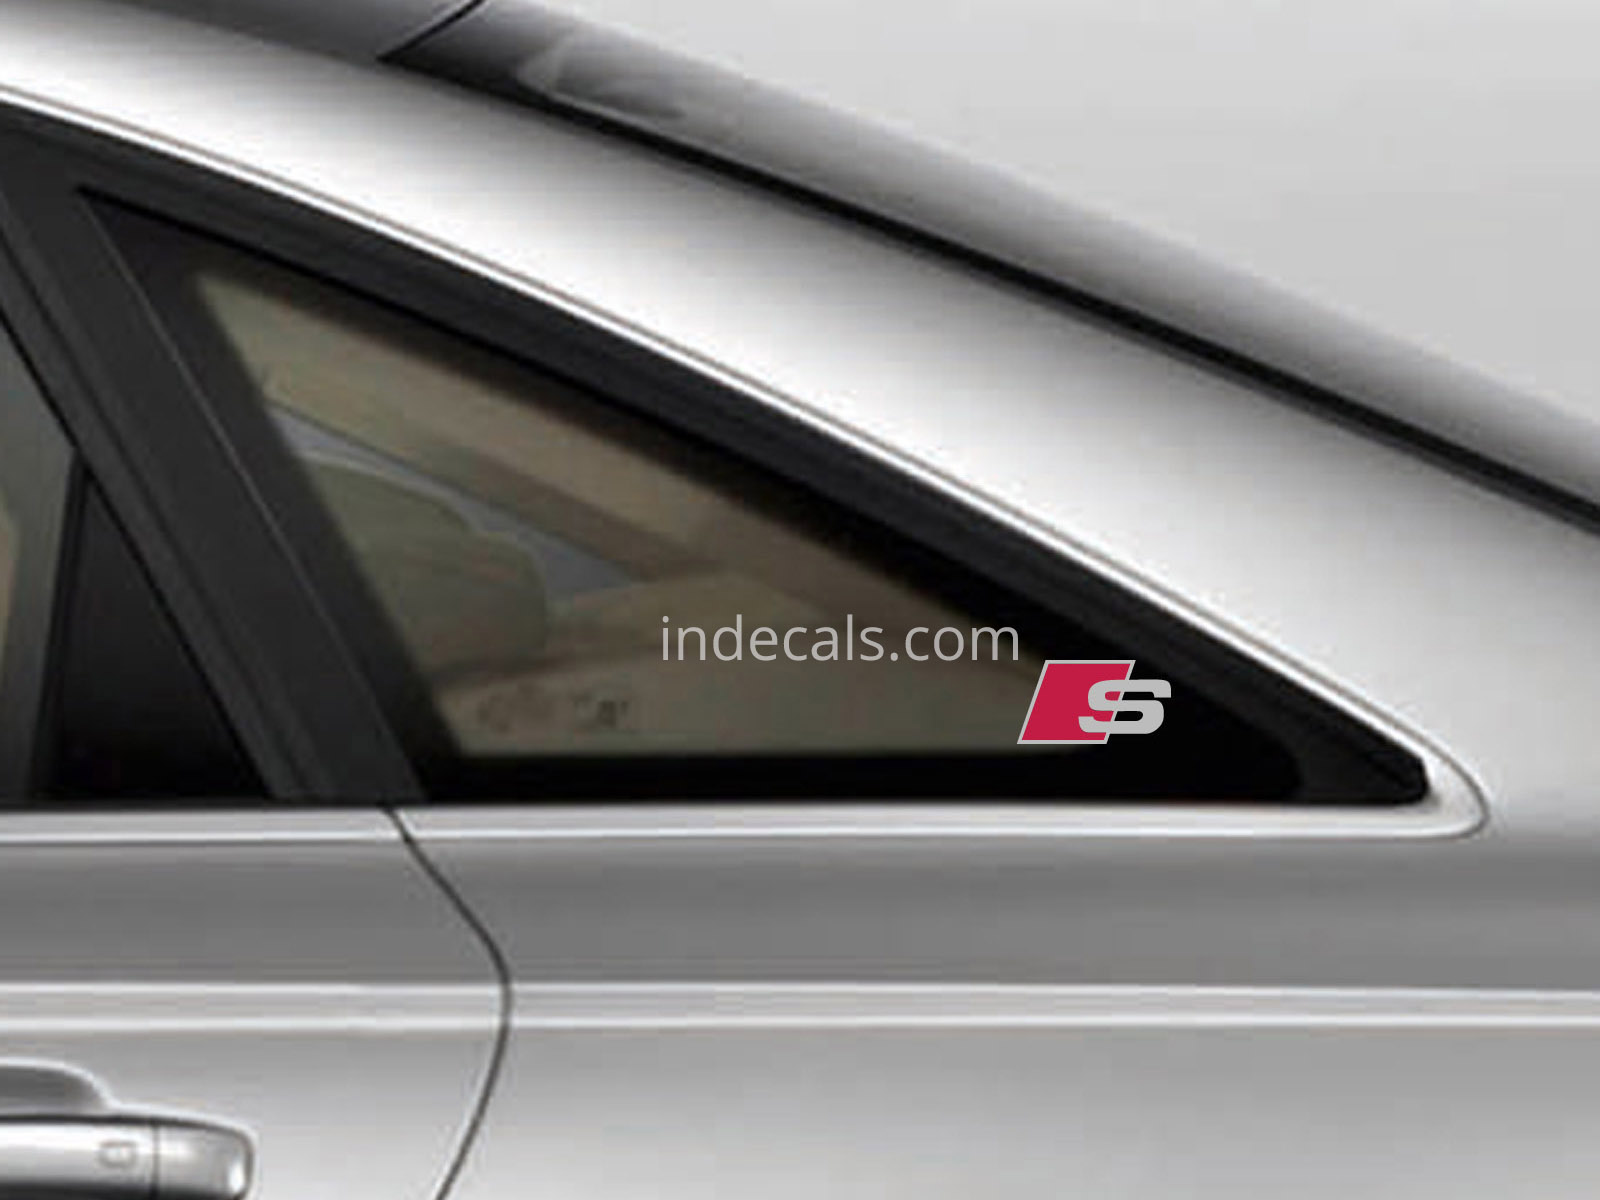 2 x Audi S-Line Stickers for Rear Small Window - Silver + Red